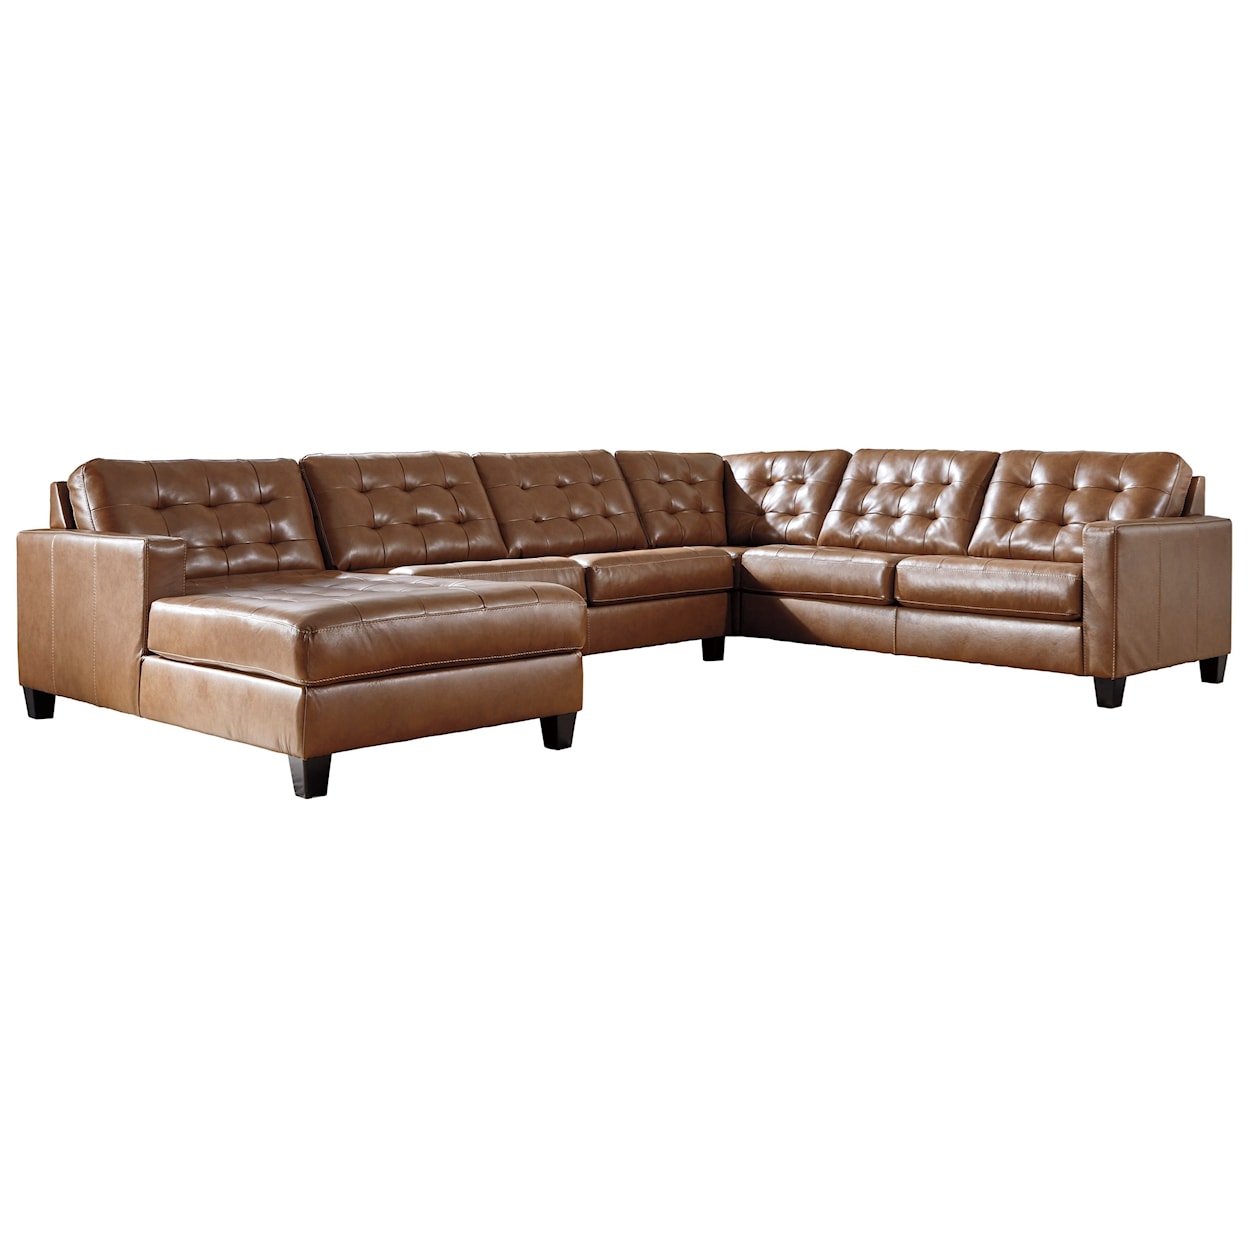 Signature Design by Ashley Furniture Baskove 4-Piece Sectional